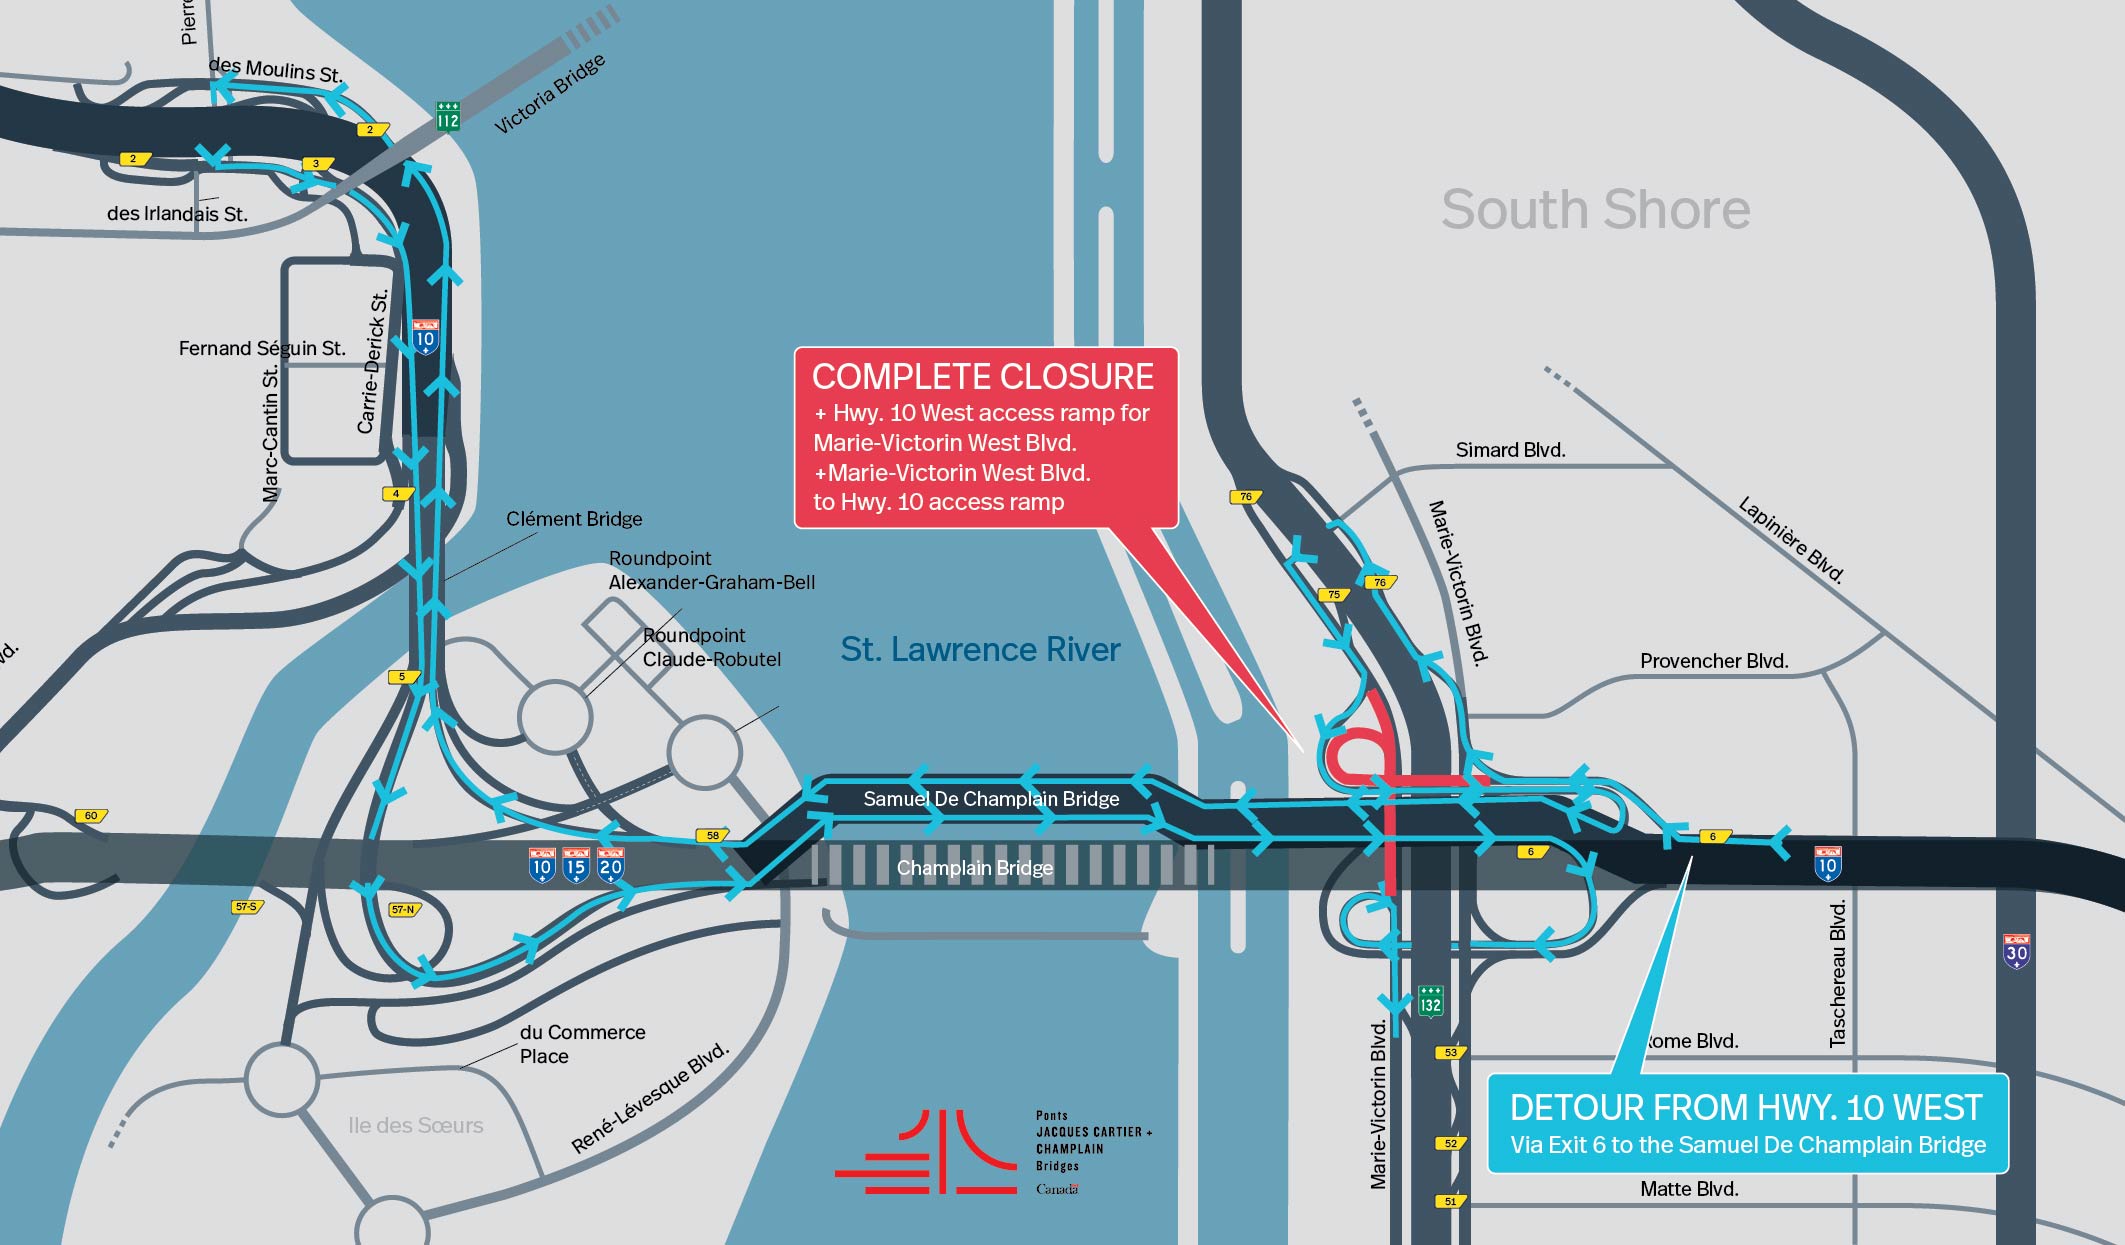 Brossard Sector | Complete closure of Marie-Victorin West Blvd. and from the Hwy. 10 West access ramp toward Marie-Victorin West Blvd., on May 2